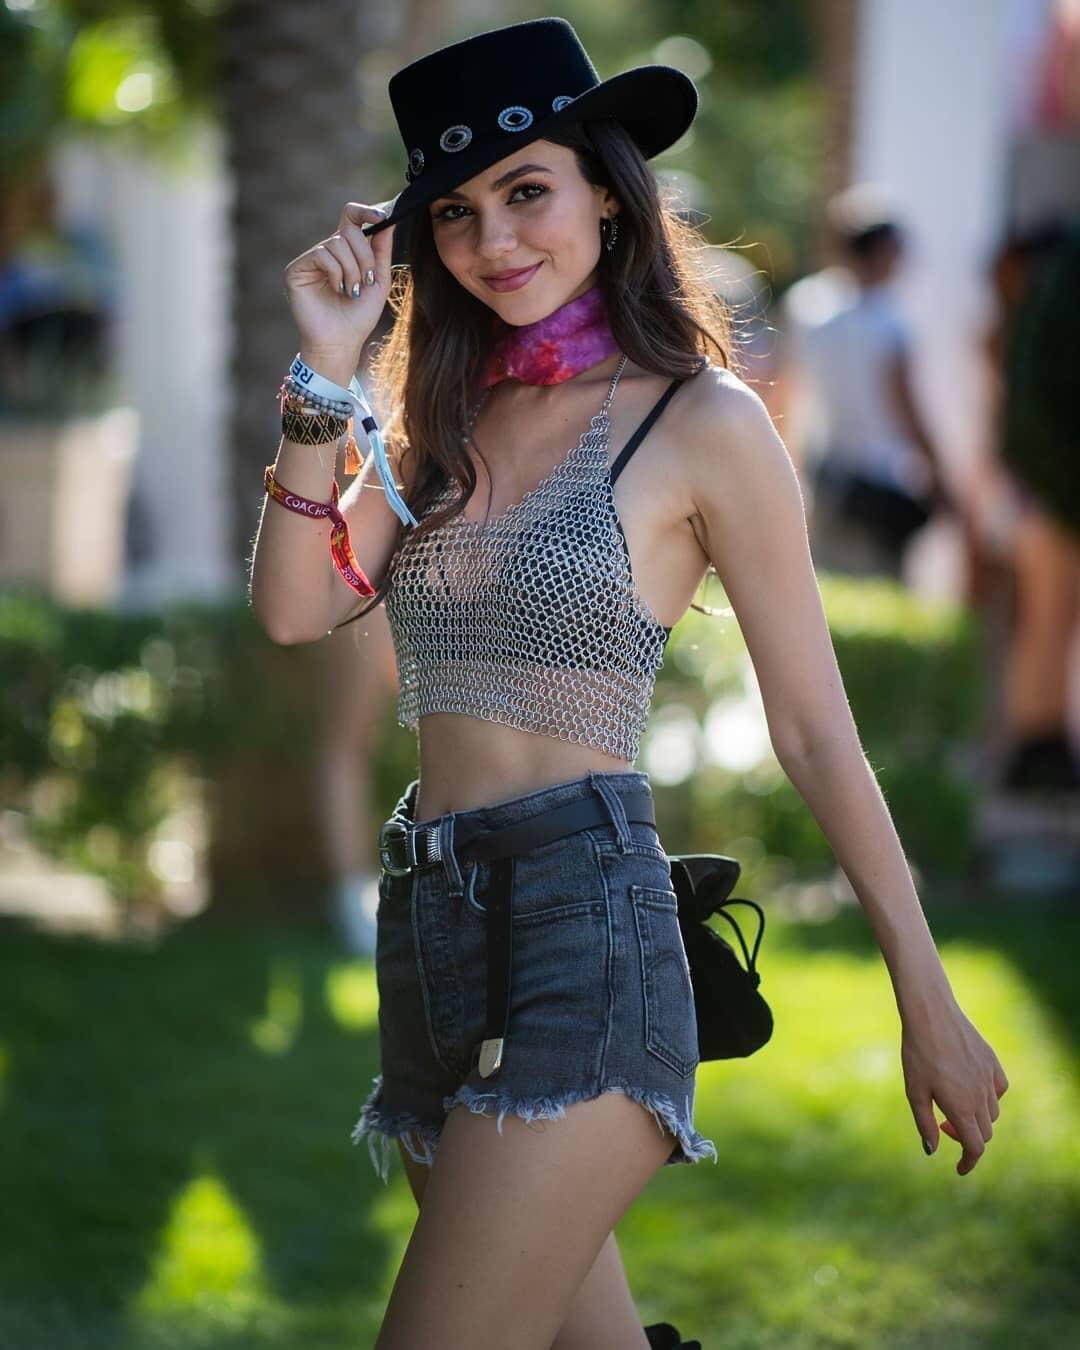 Victoria Justice has such an amazing body